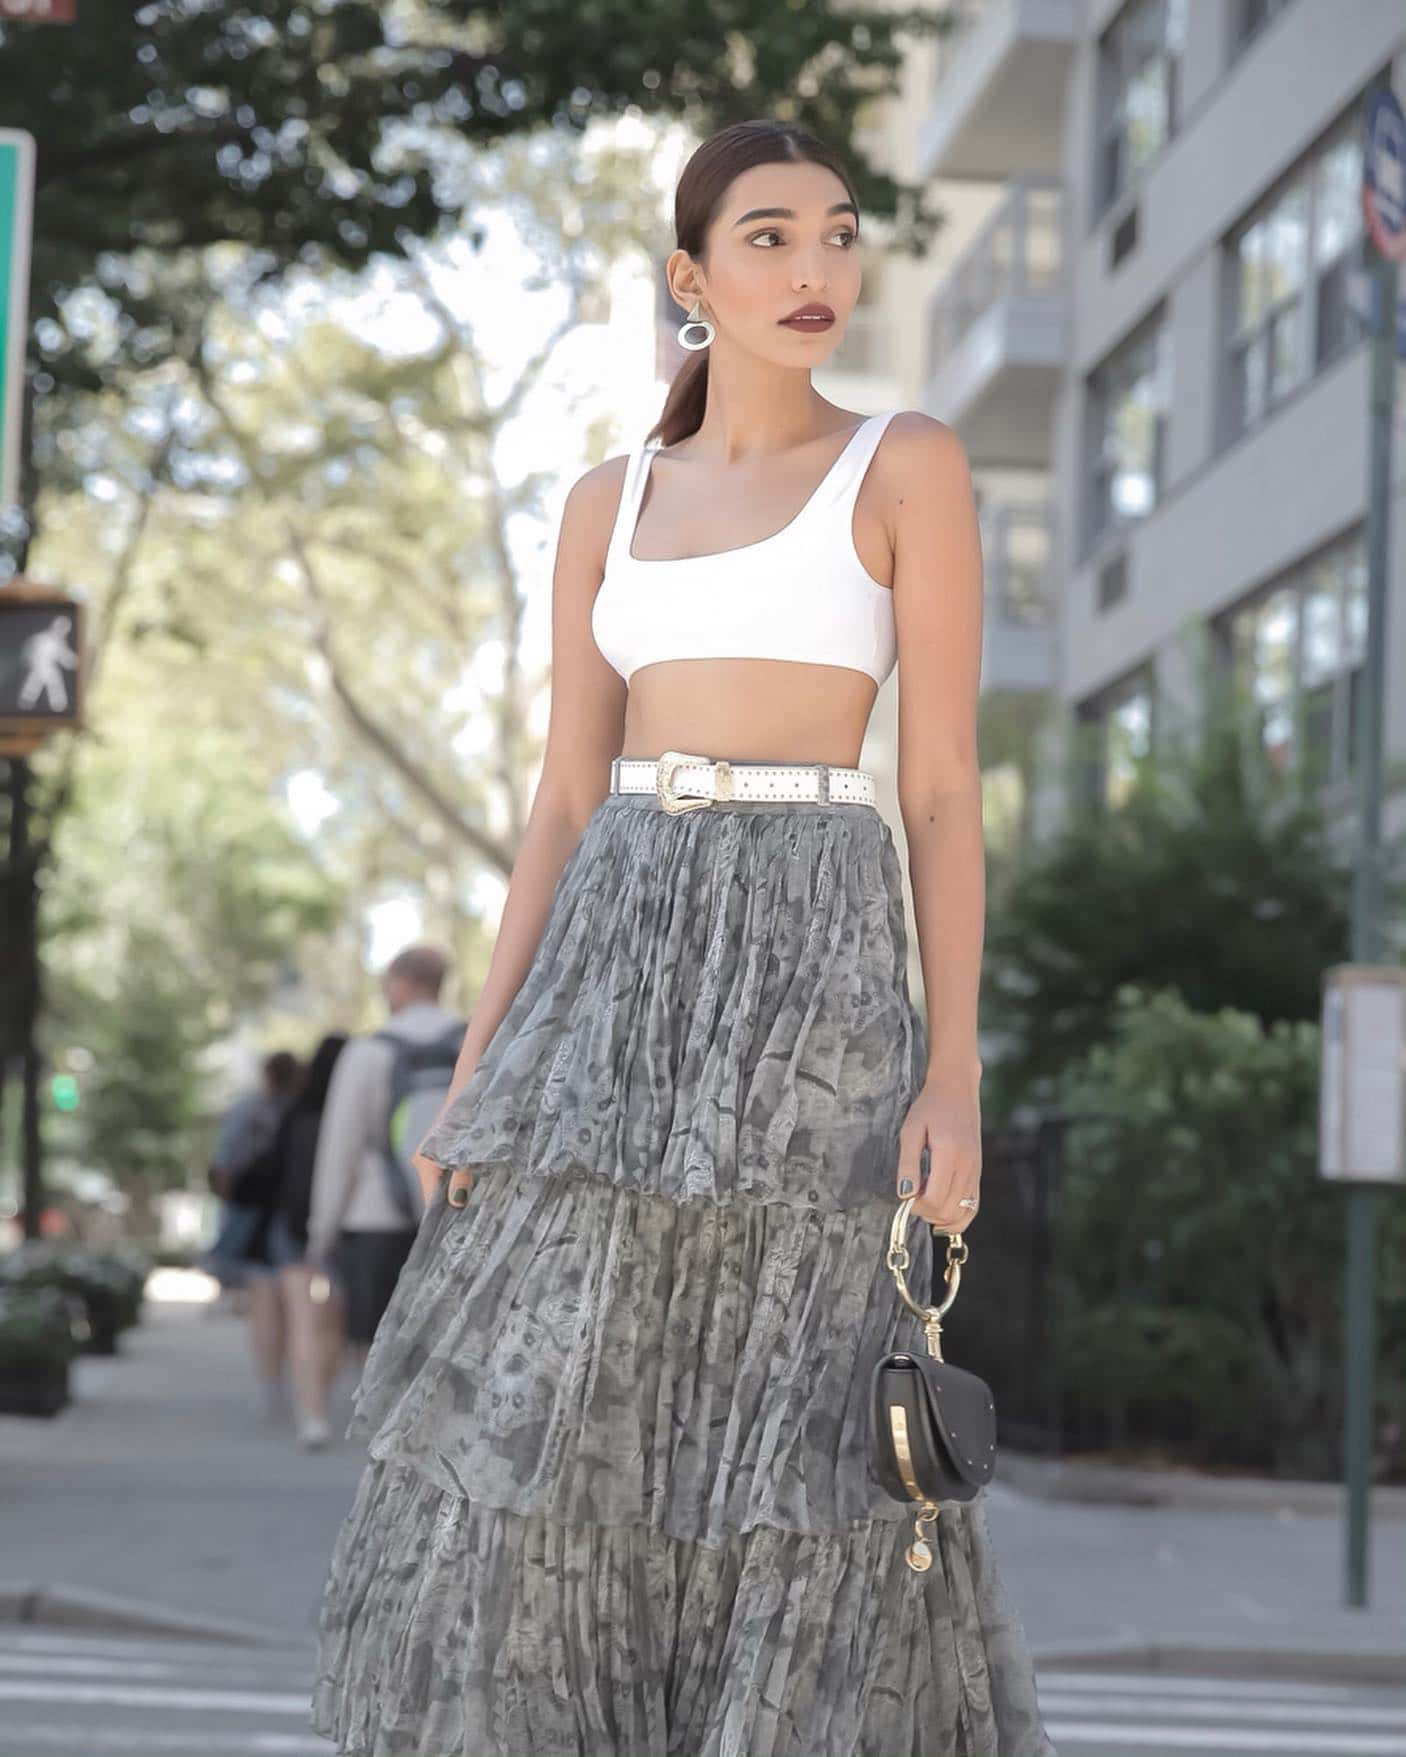 Pair It With A Skirt When You Need A Summer Elegant Look